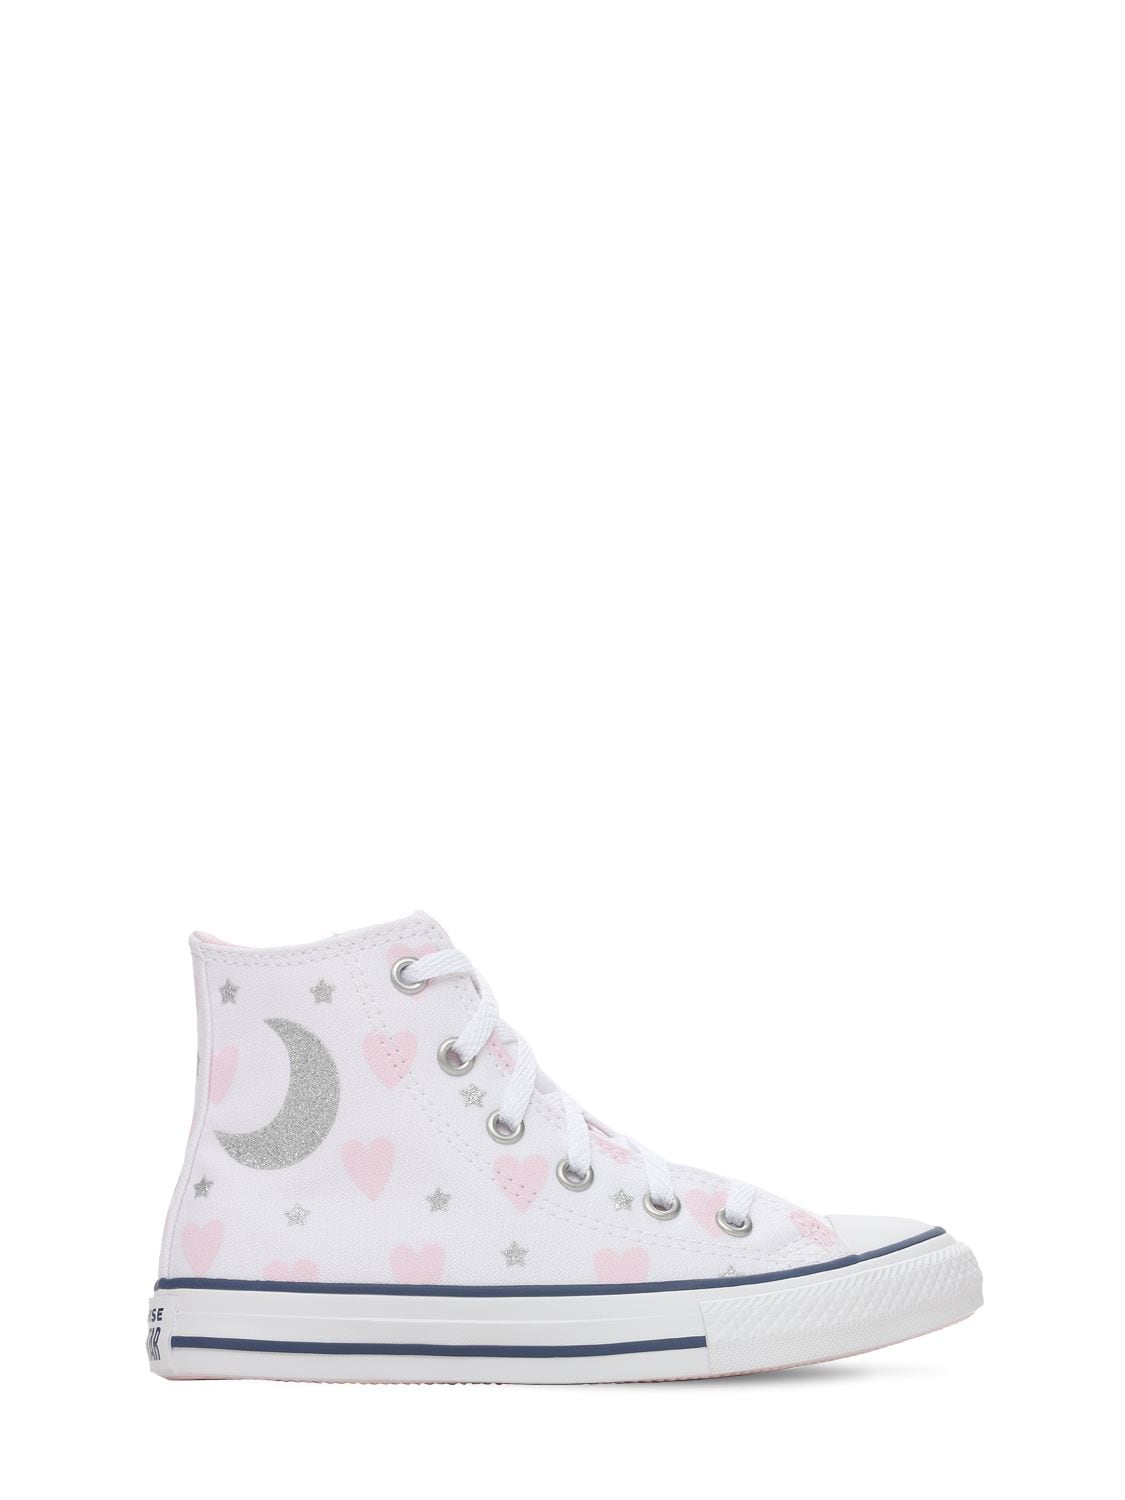 Converse Kids' Chuck Taylor High Trainers In White